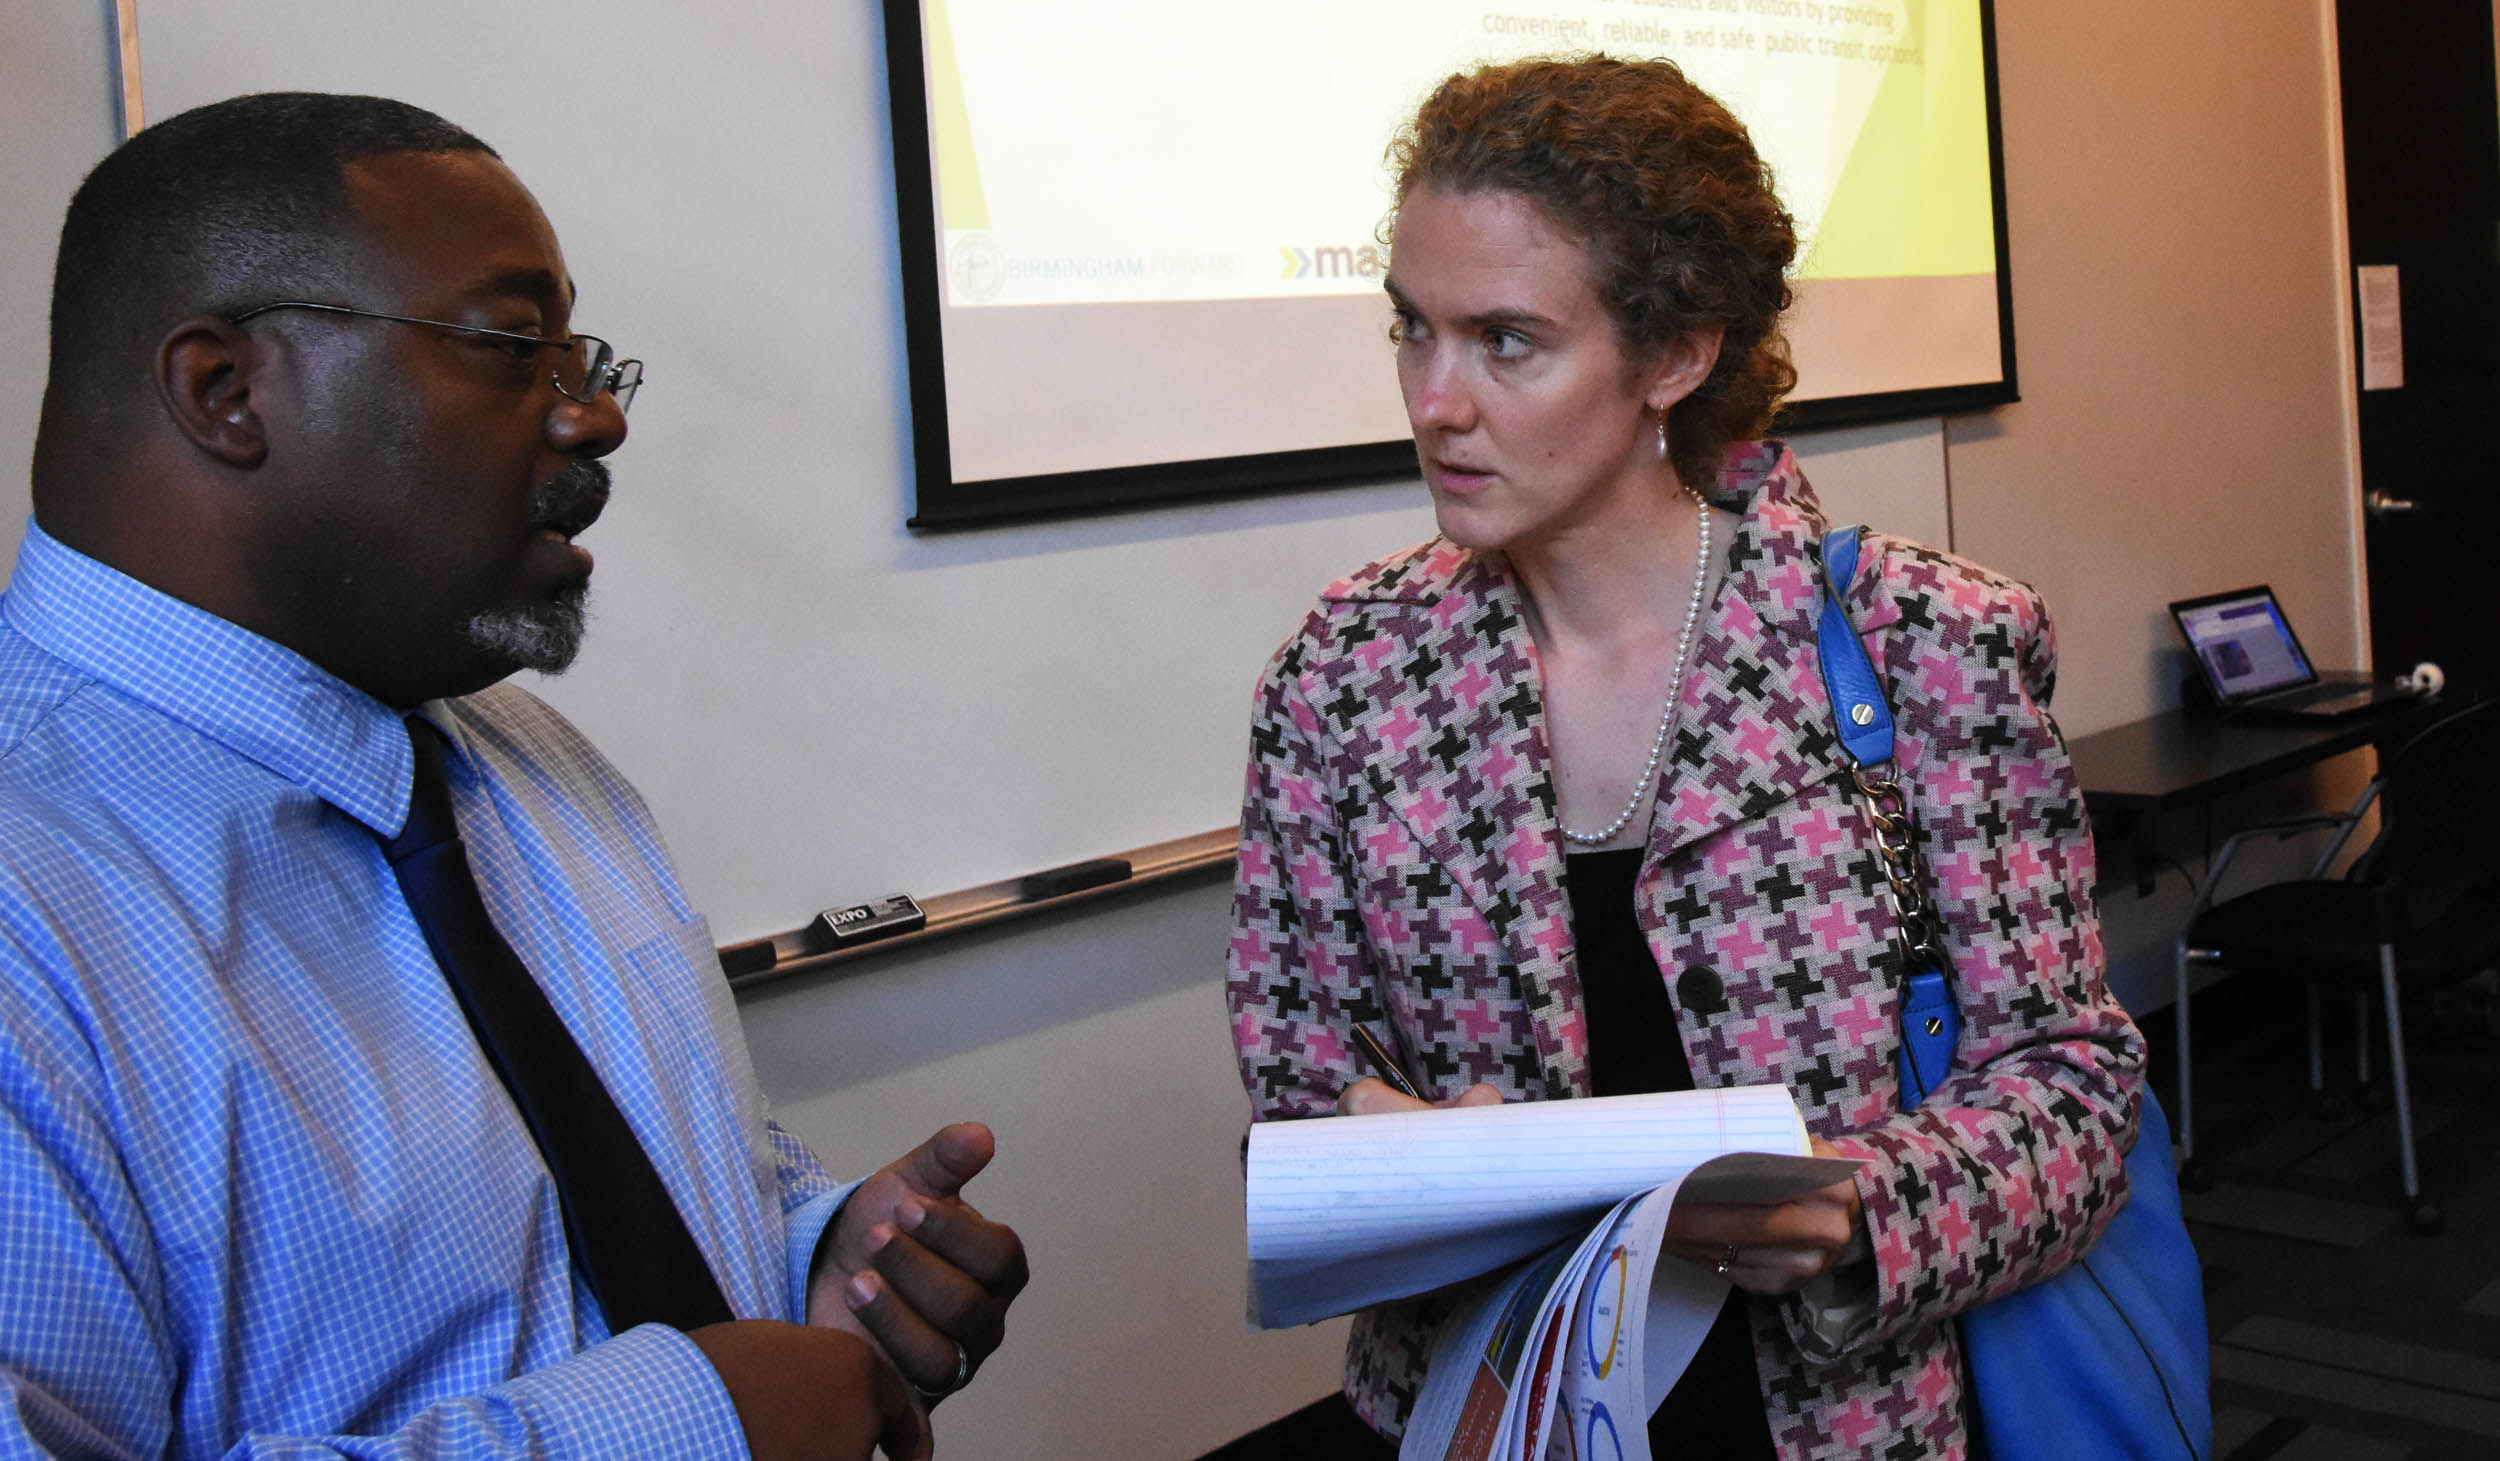 Darrell Howard talks with Sarah Stokes of Southern Environmental Law Center. (Solomon Crenshaw Jr., special to The Times)